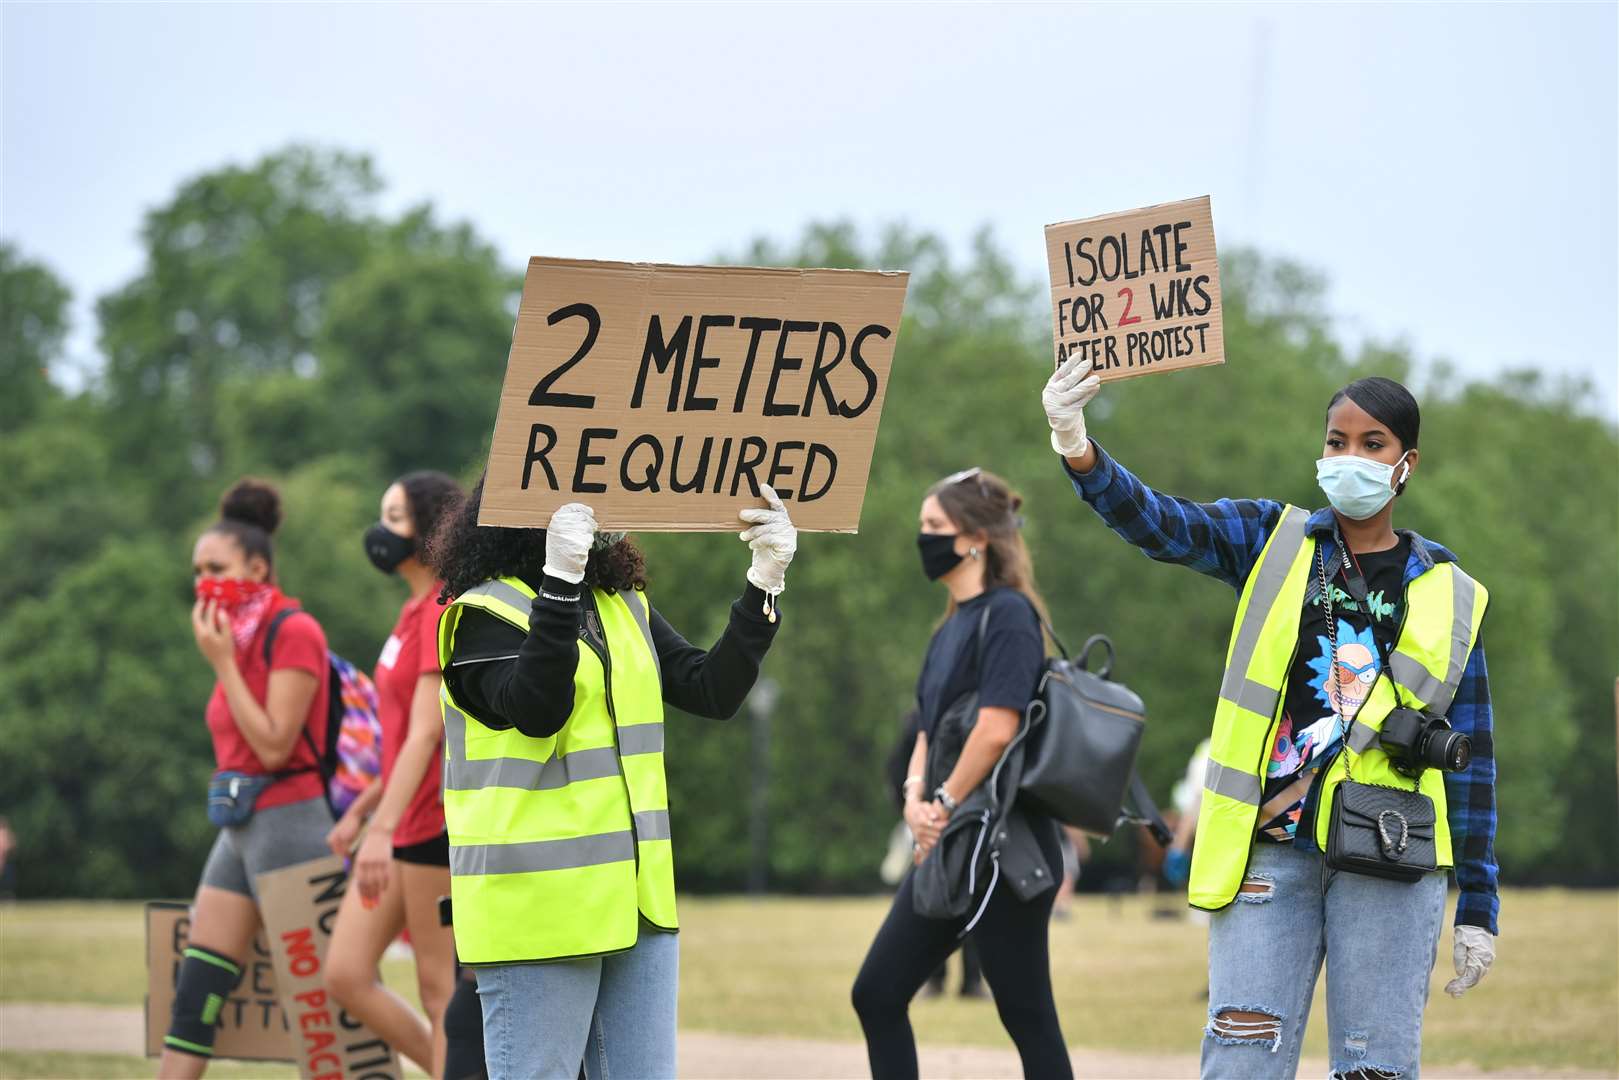 Stewards direct people as they begin to gather ahead of the protest (Dominic Lipinski/PA)